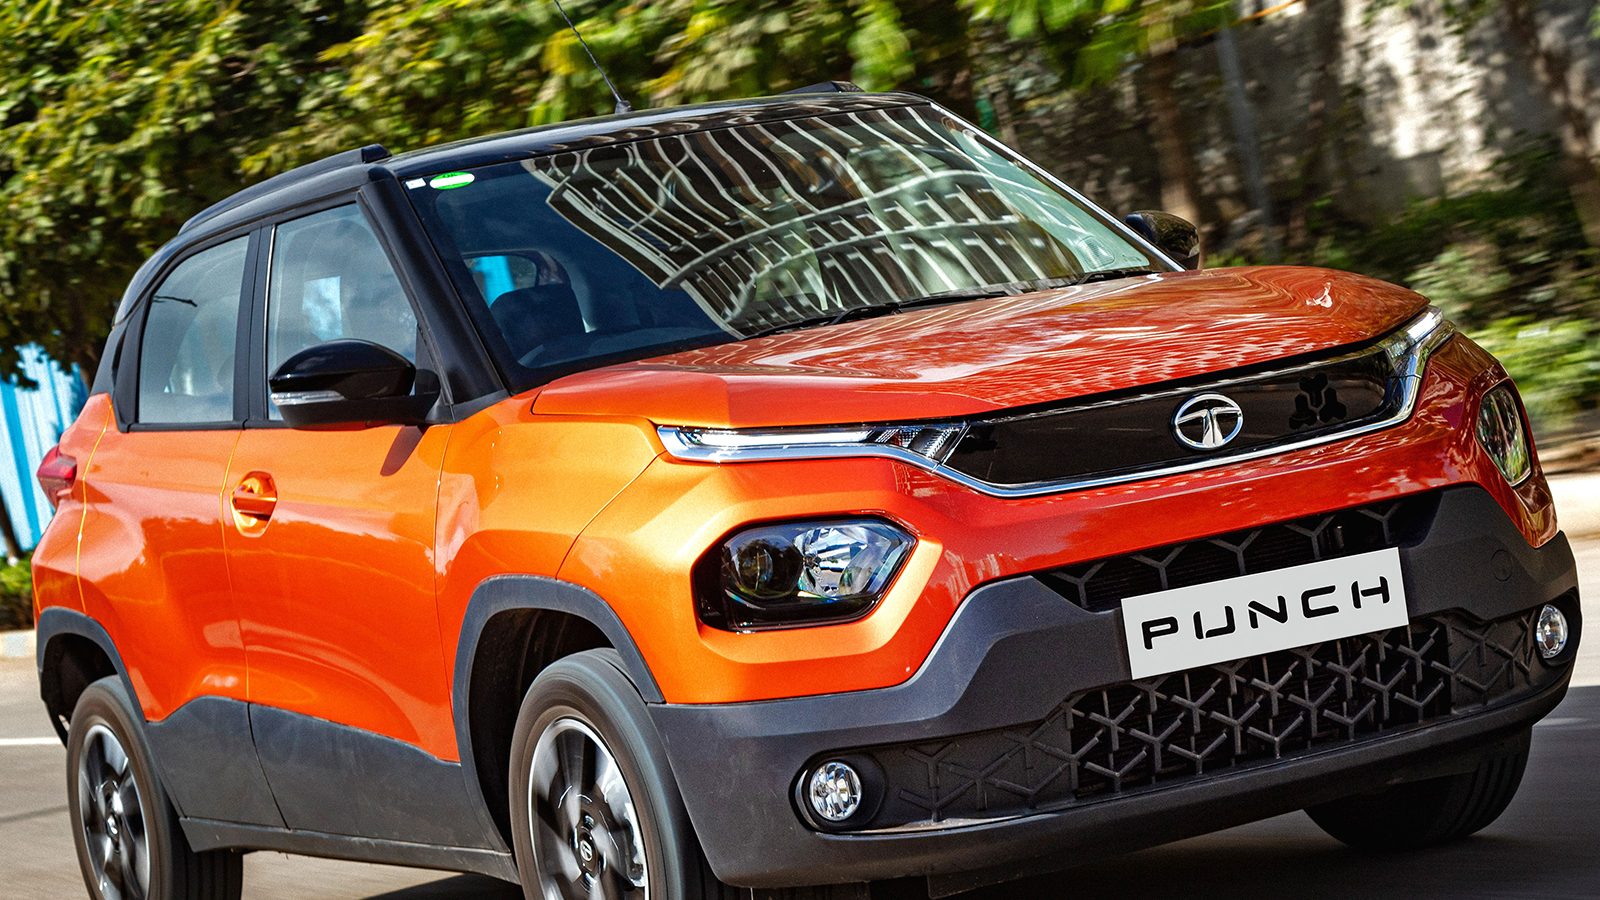 Tata Punch SUV Unveil LIVE Updates: Price, Bookings, Variants and More Details